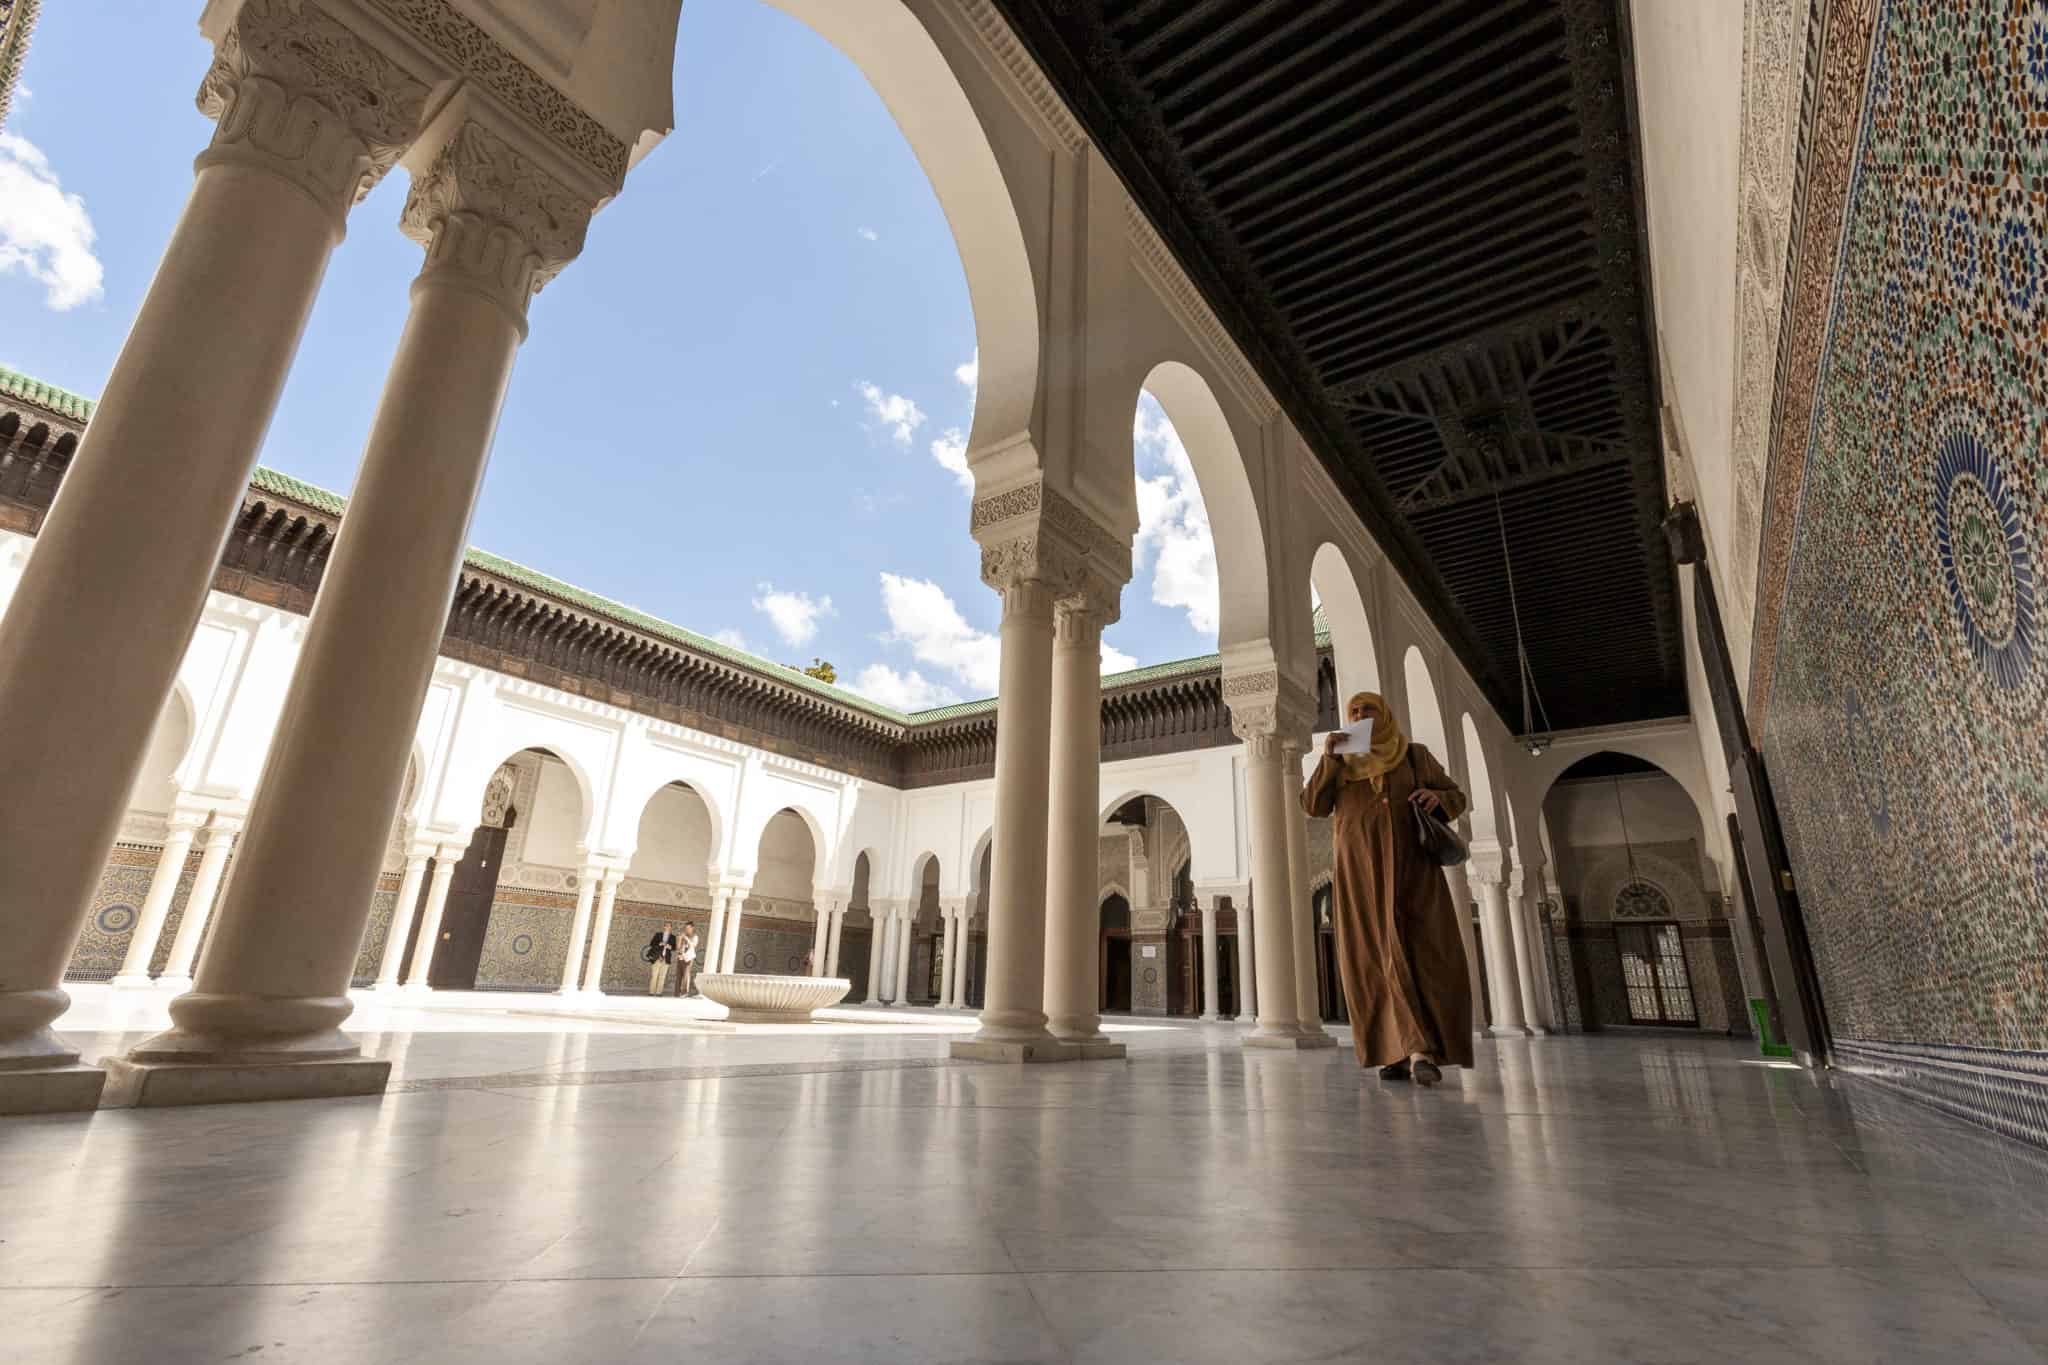 A woman walks through the Grand Mosque in Paris, the largest mosque in Paris.